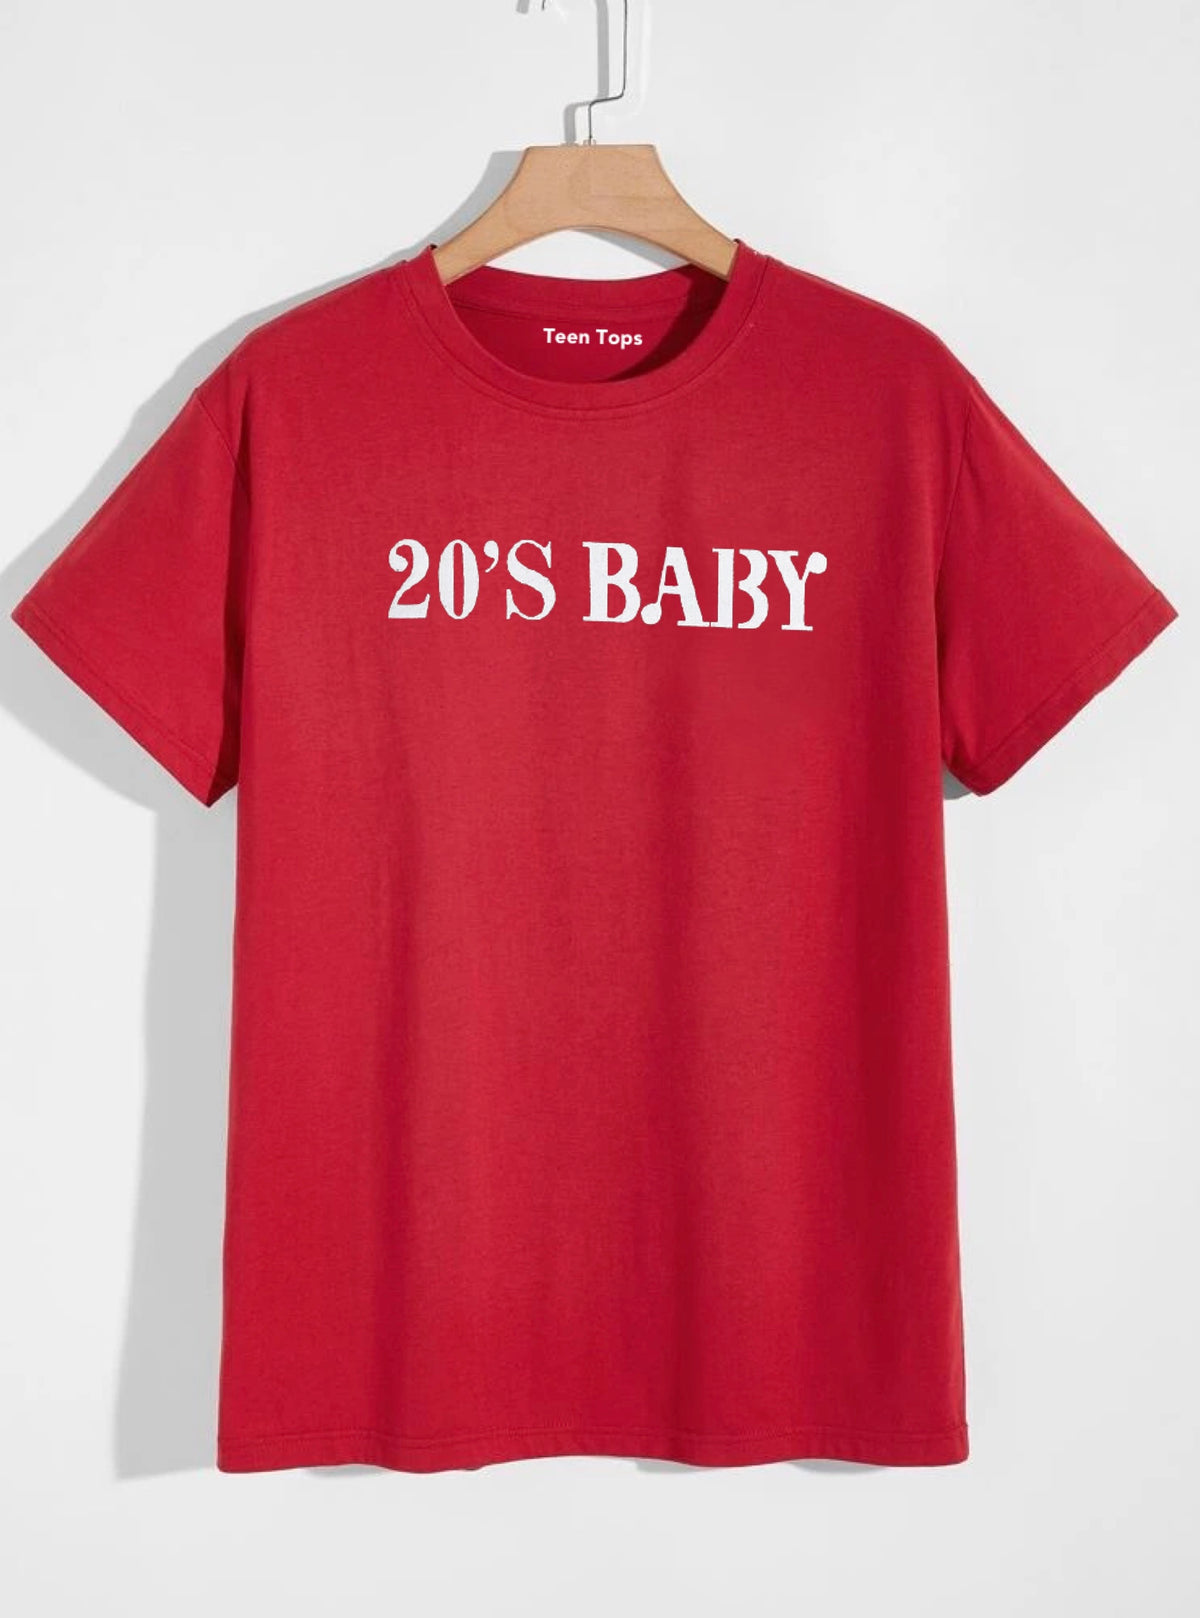 Teen Red Cotton 20'S Baby T-shirt